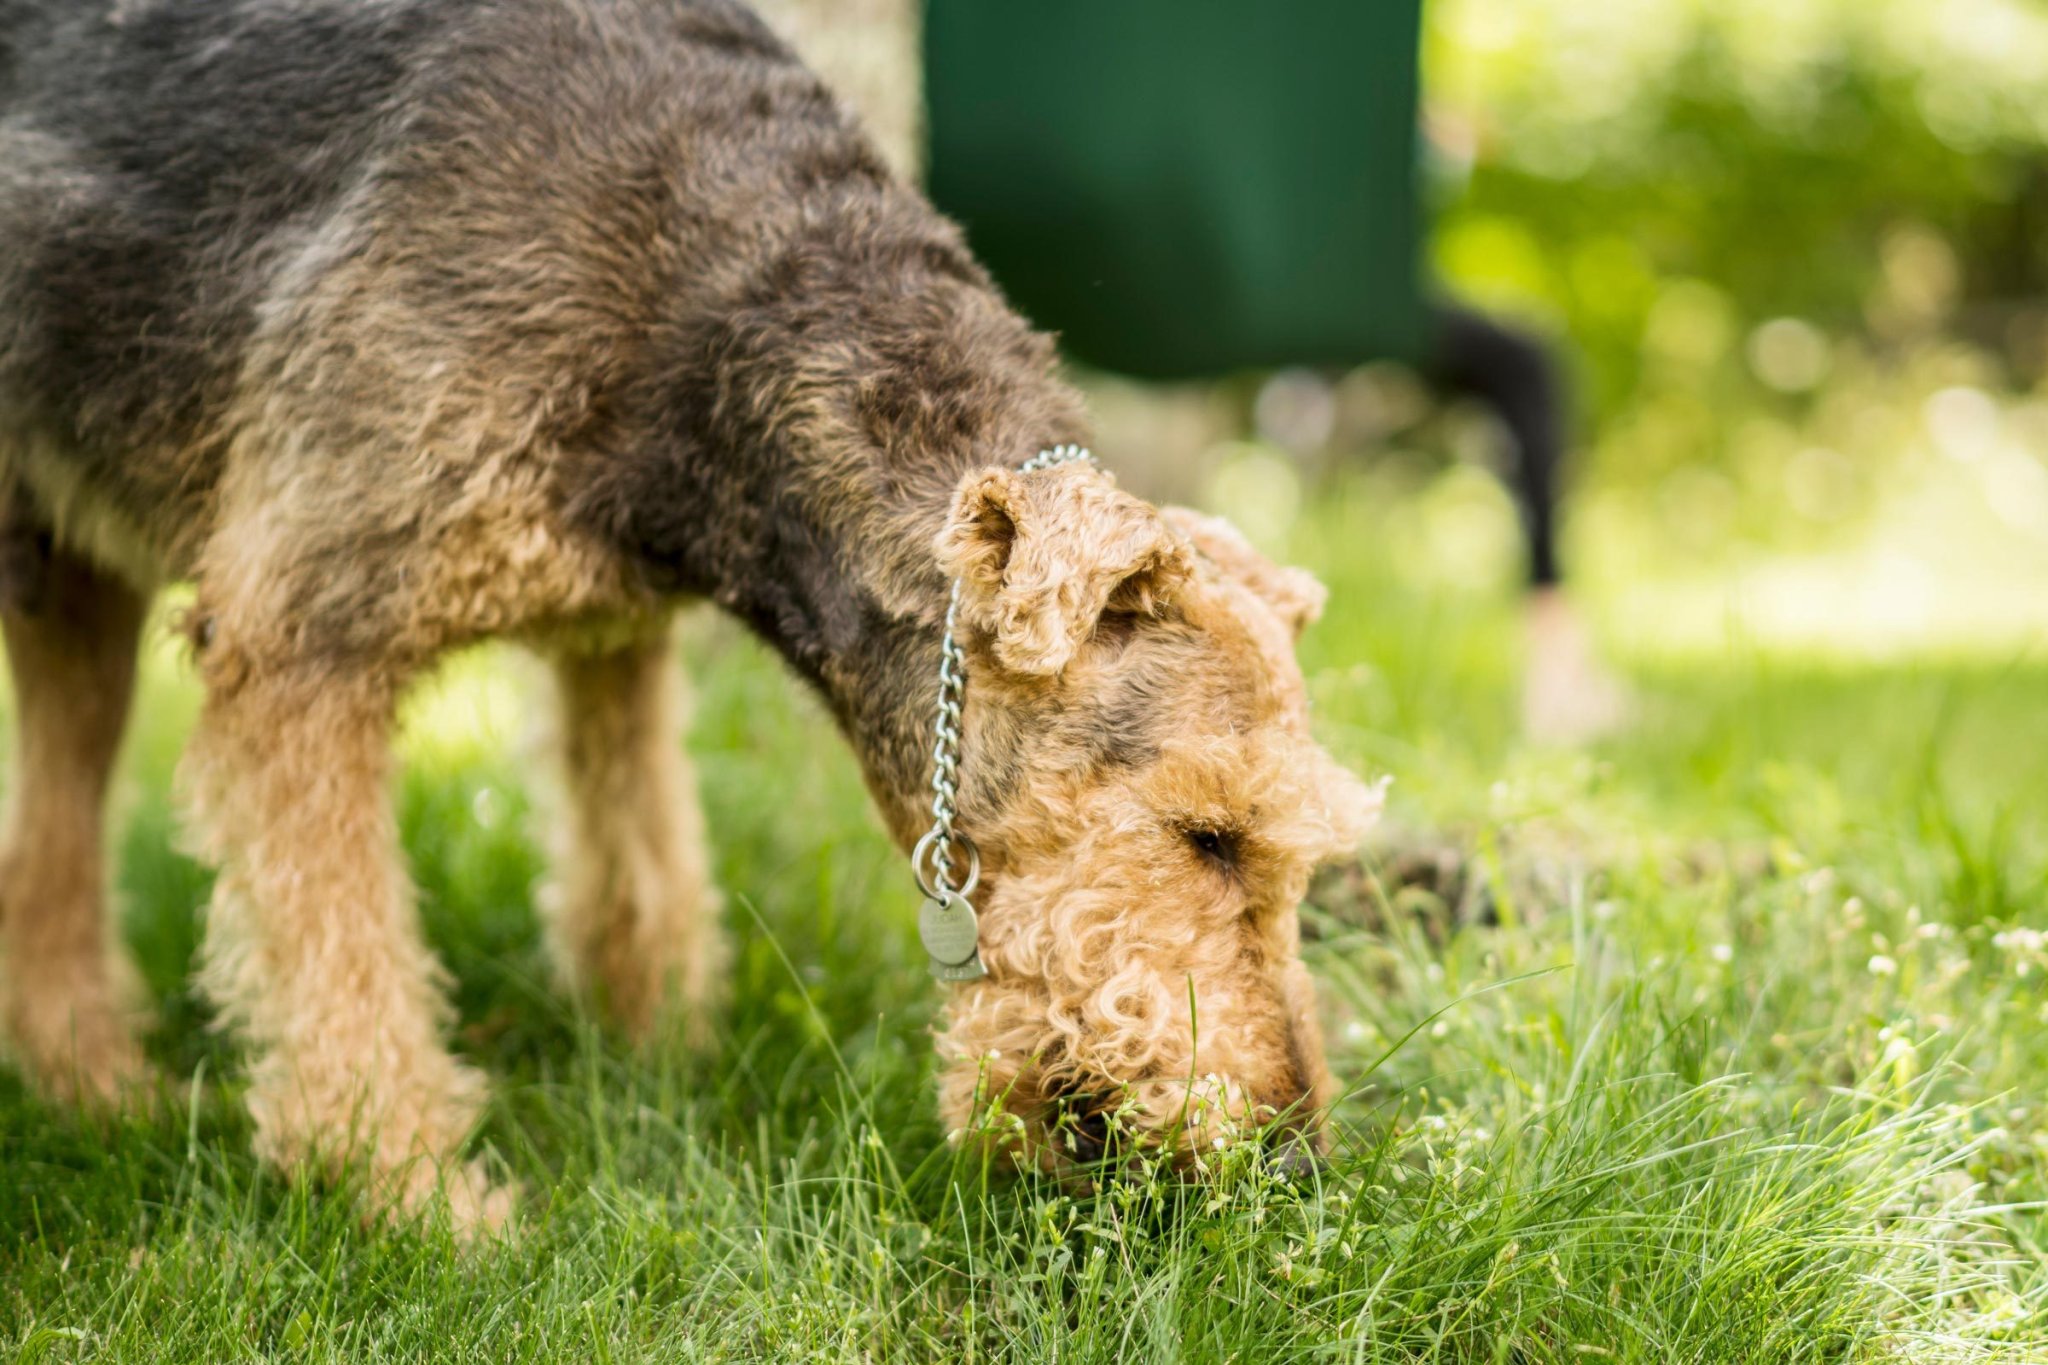 Why Do Dogs Eat Grass? 7 Common Reasons